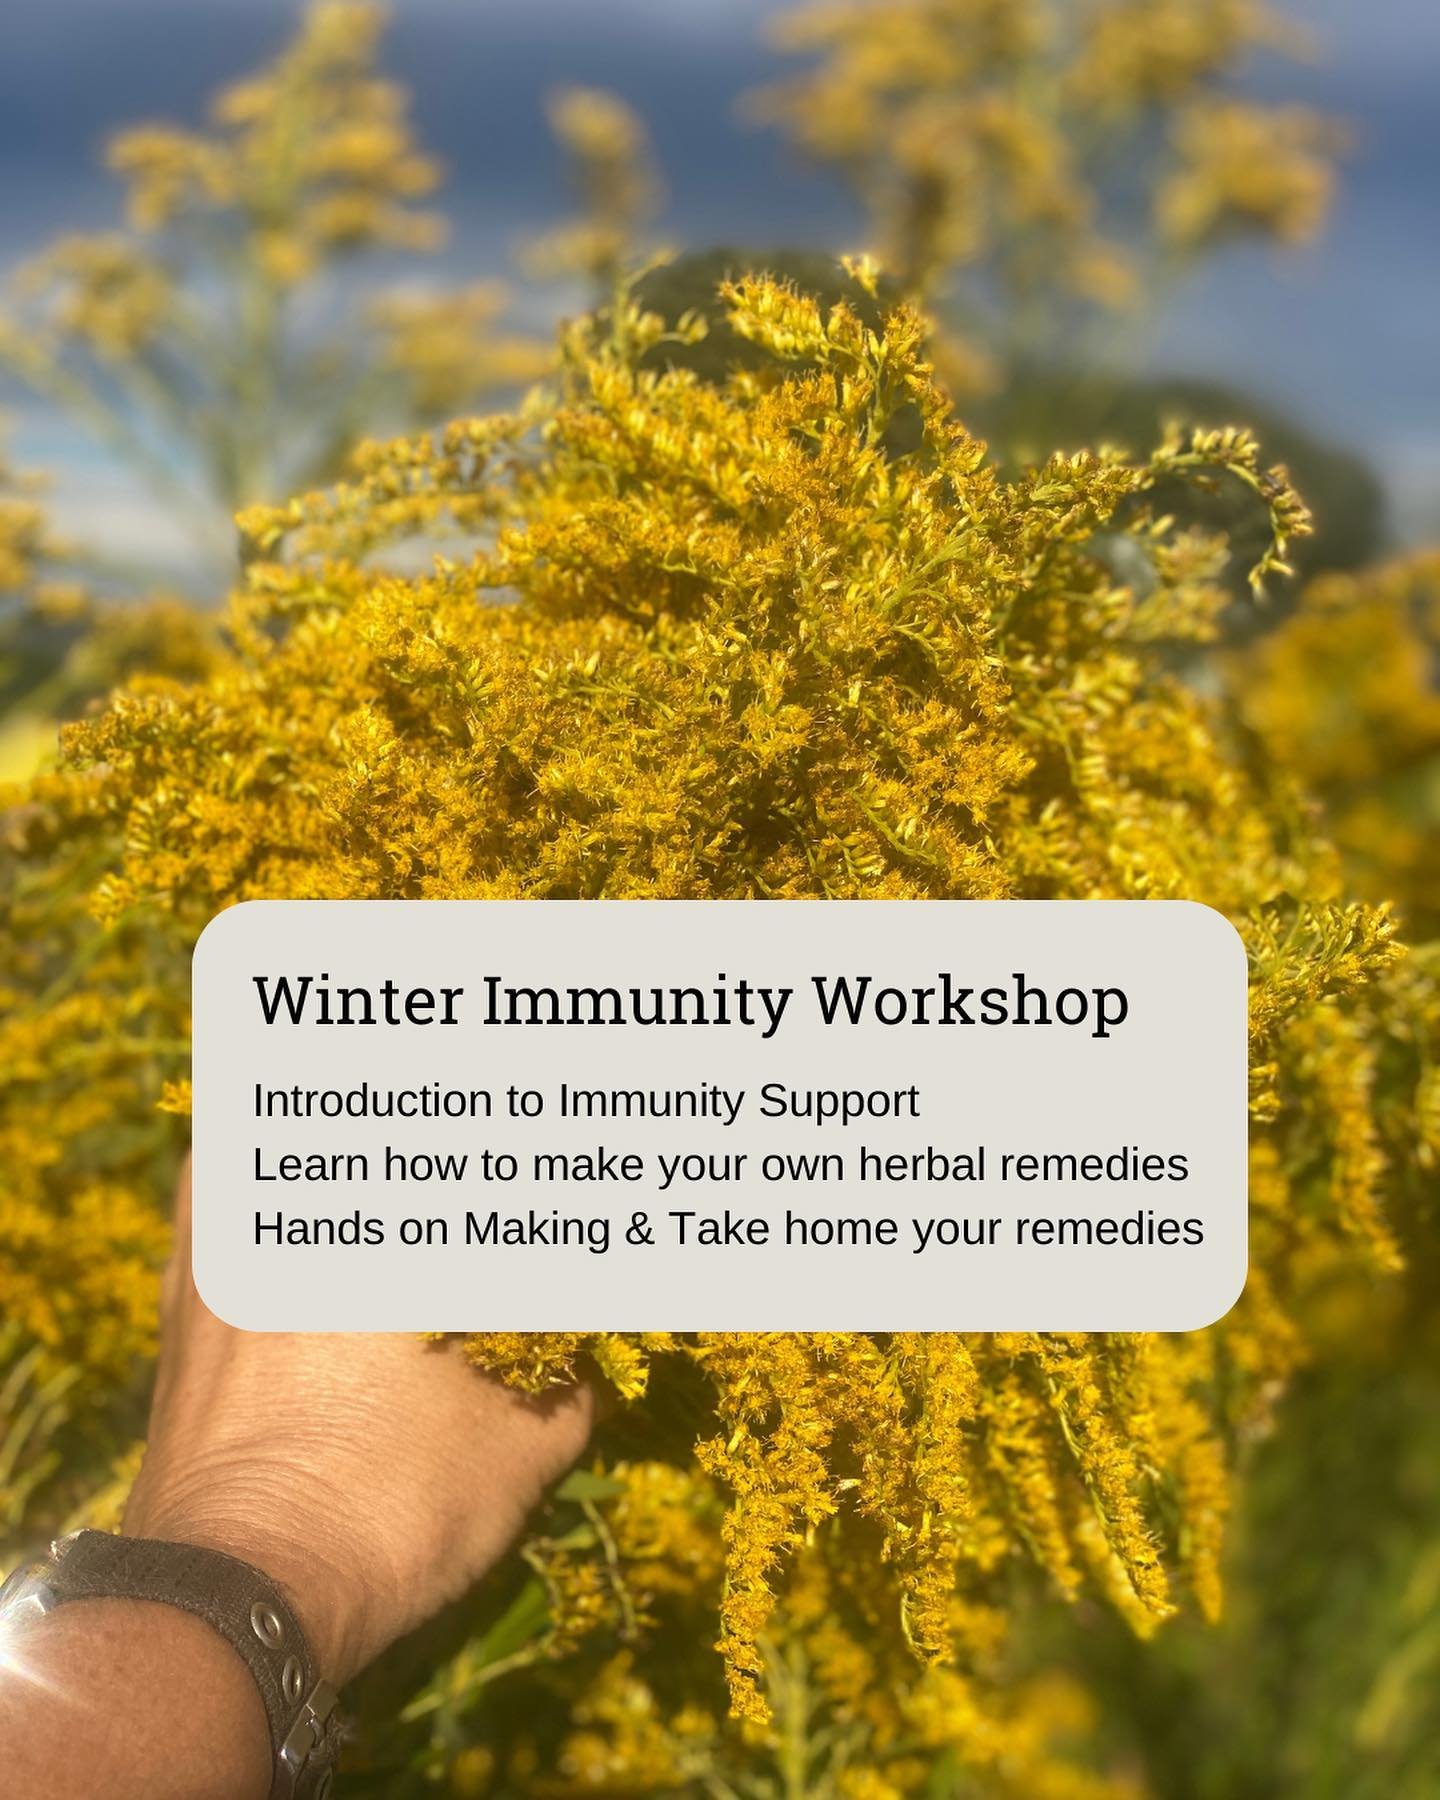 In person fun herbal remedy making workshop!

Saturday 4th May 12-2pm
At N&amp;B @dairy_road 

Bookings online 
Link in bio and on website

Reach out if you have any questions

See you there

#nourishandbreathe #herbalmedicine #winterimmunity #canber